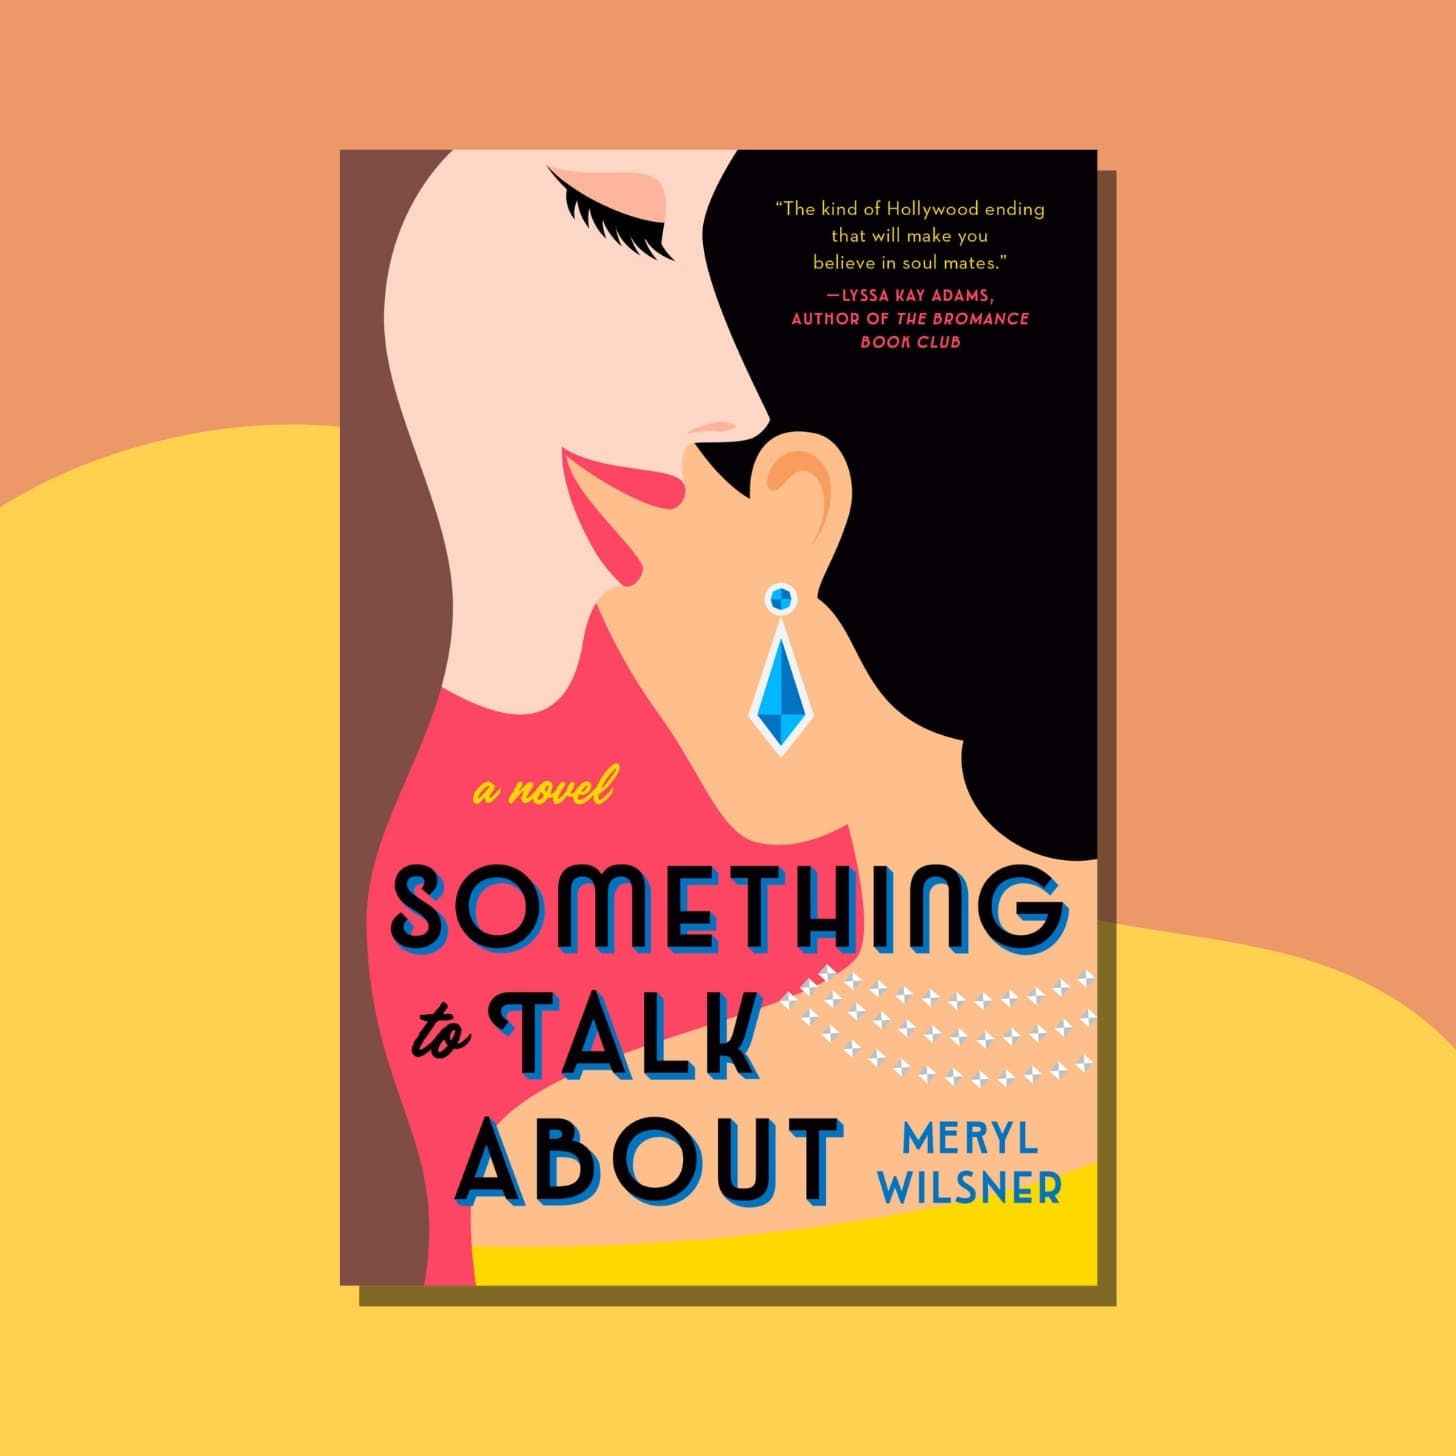 “Something to Talk About” by Meryl Wilsner - cover is a woman whispering into another woman's ear